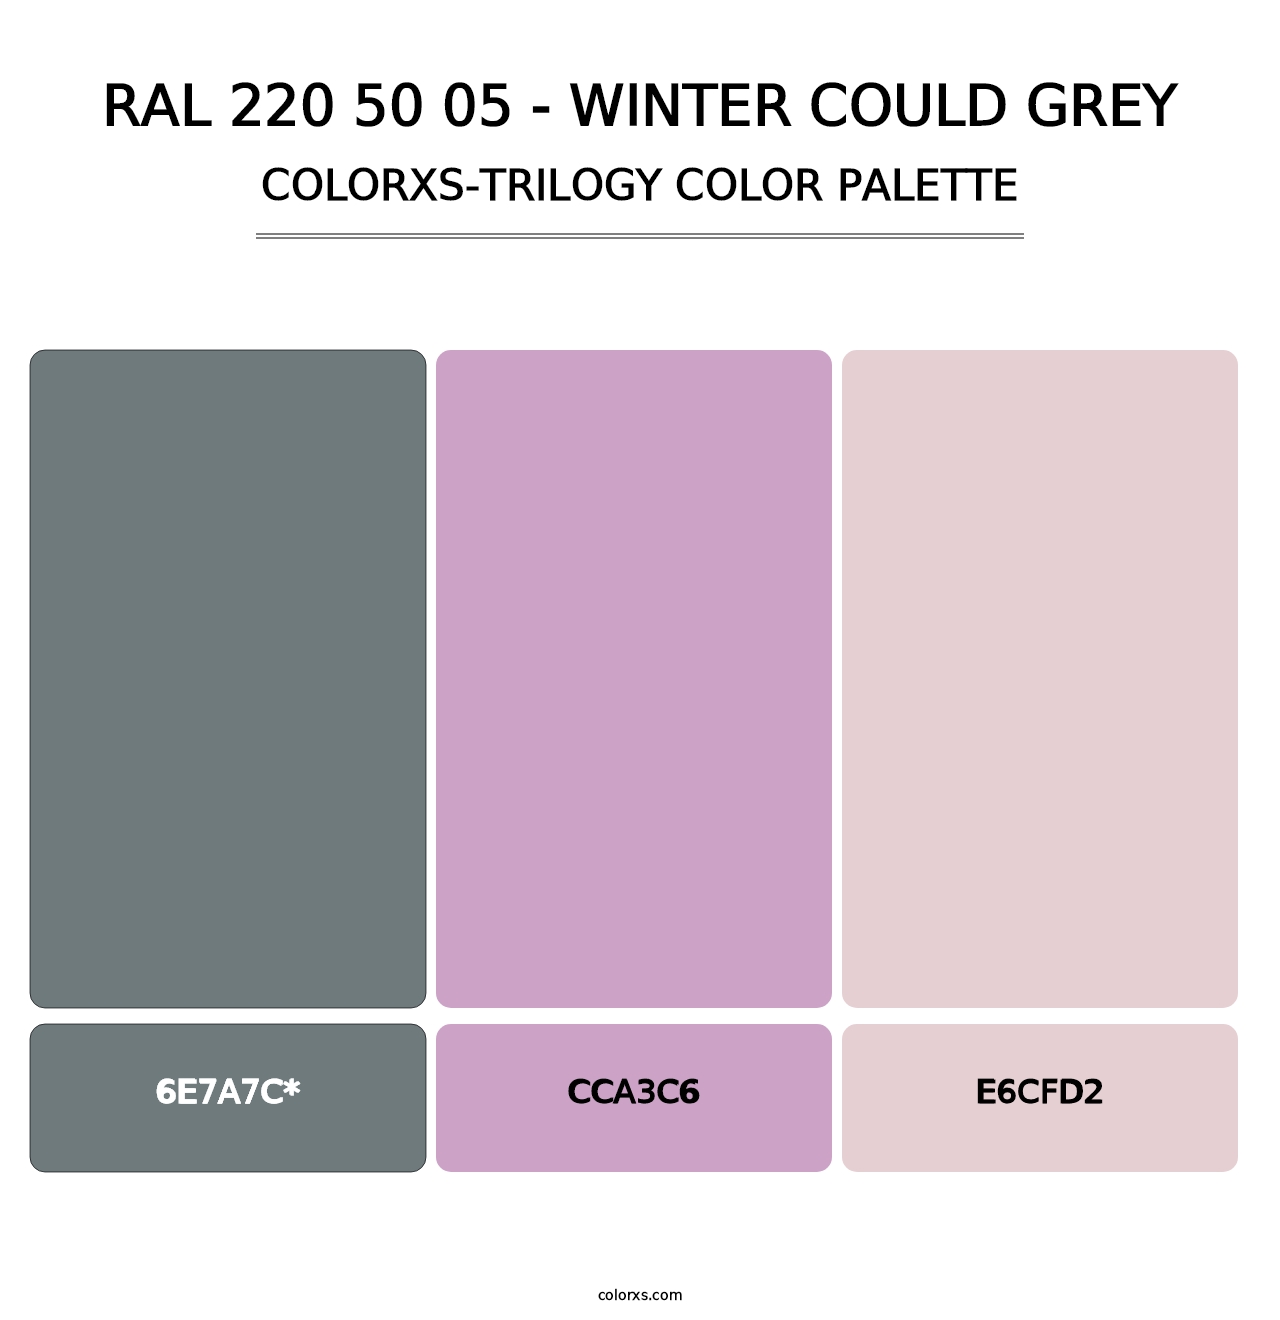 RAL 220 50 05 - Winter Could Grey - Colorxs Trilogy Palette